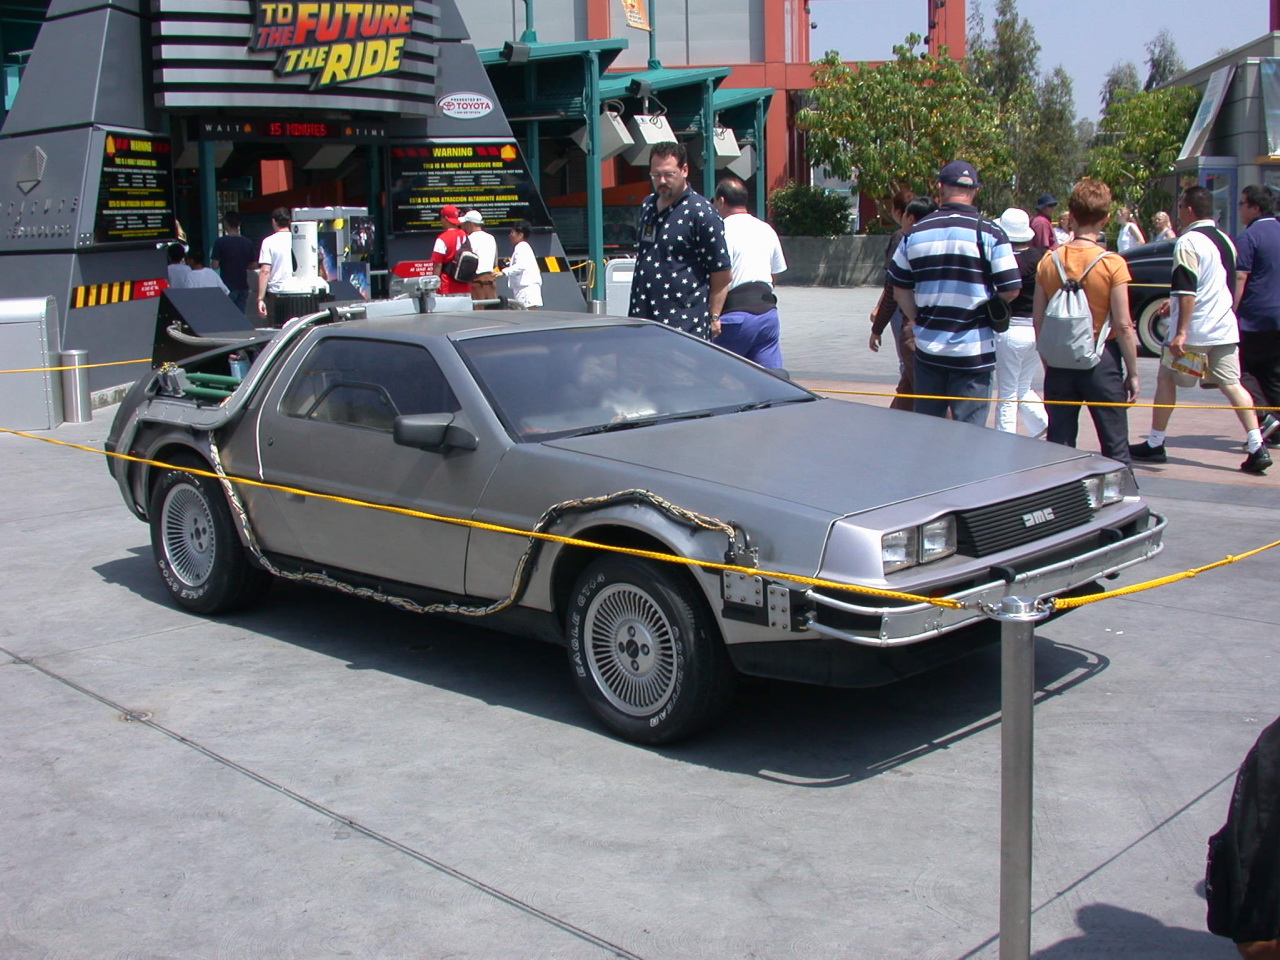 Back to the Future Ride